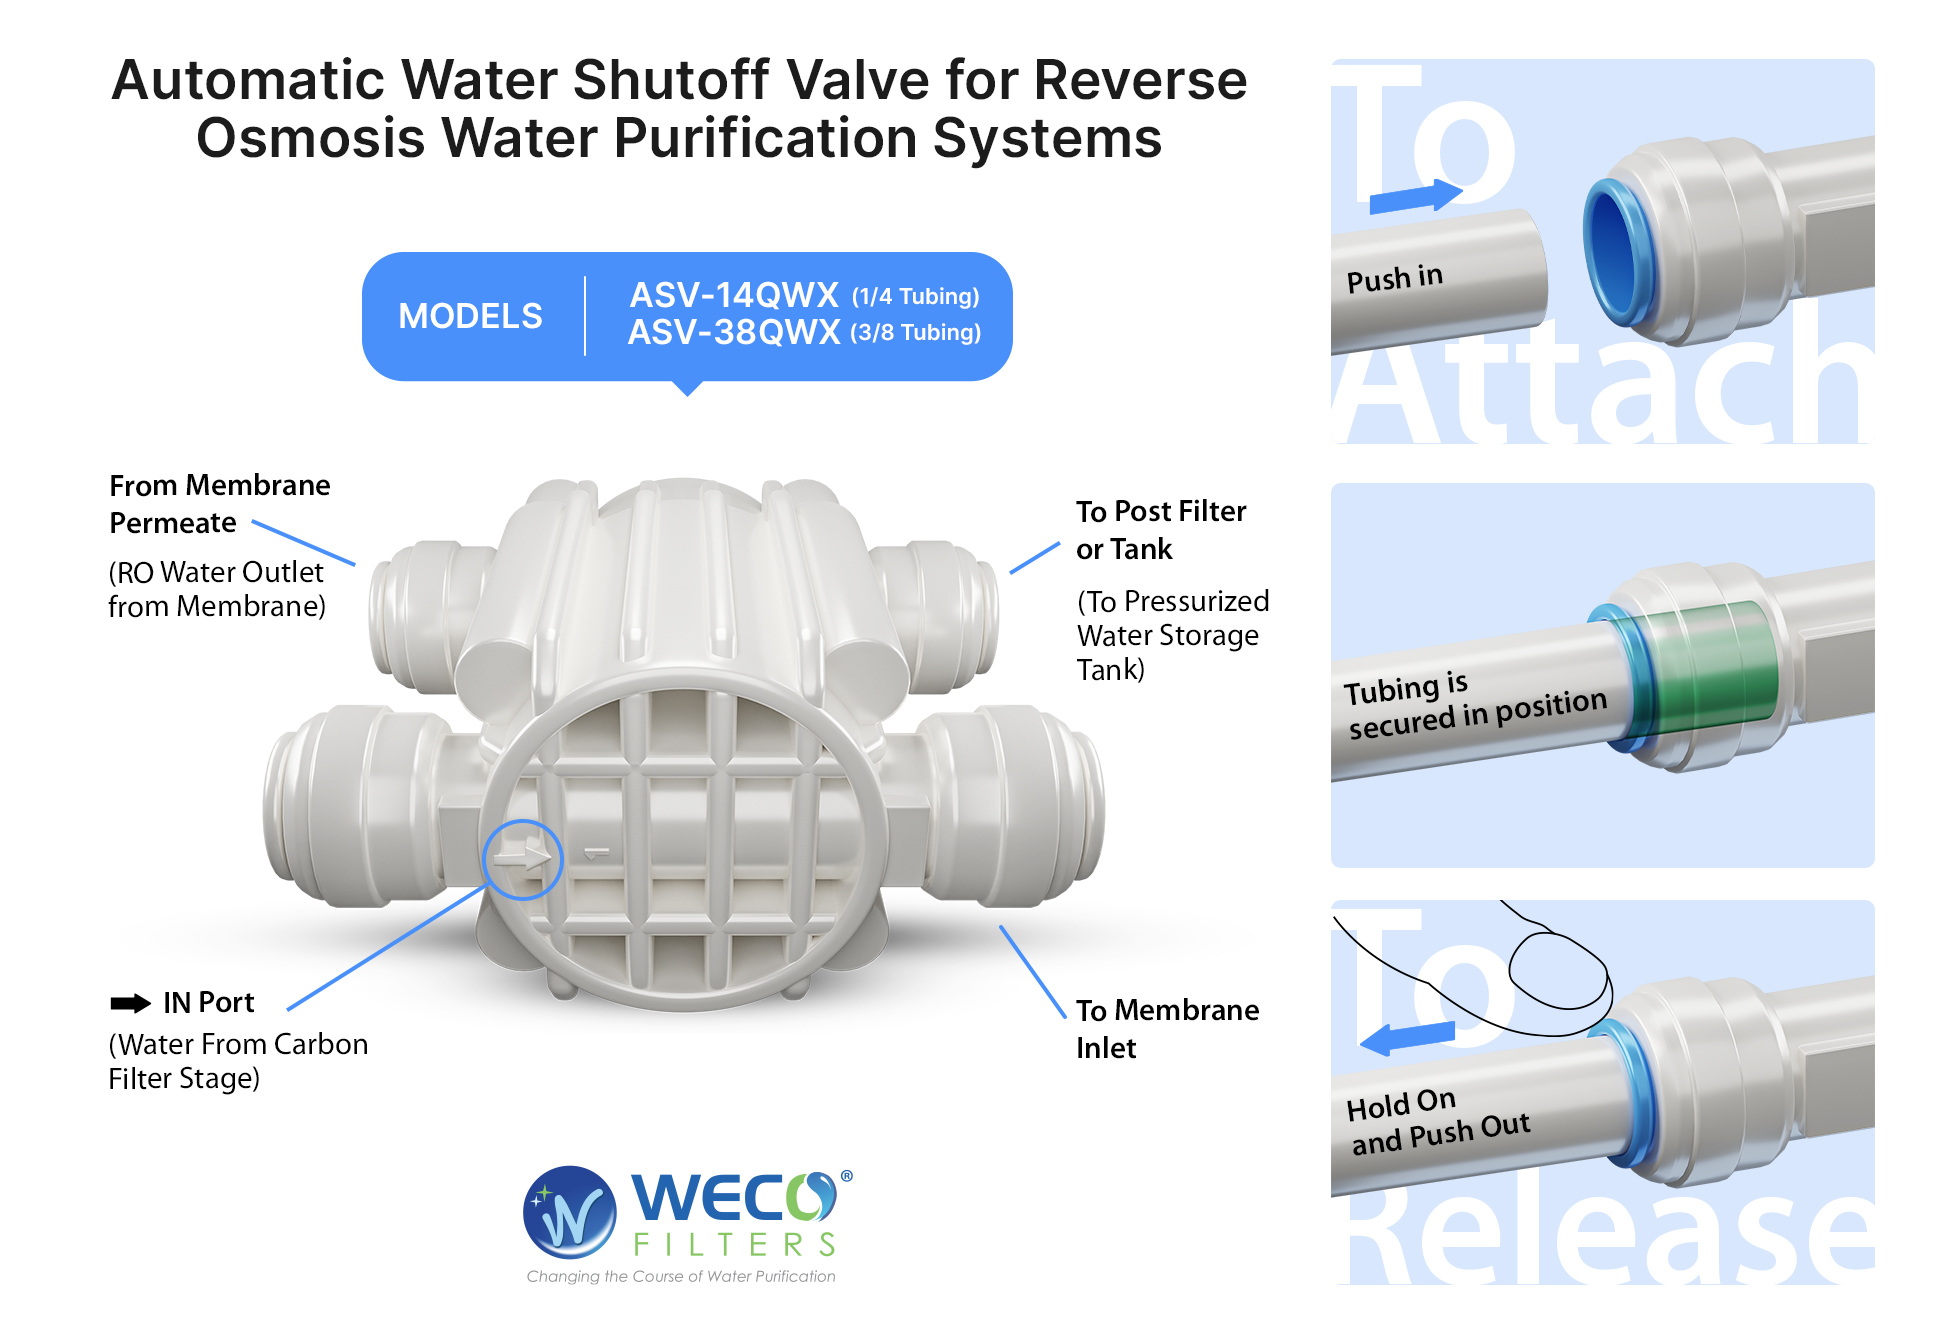 What Is an Automatic Water Shut-Off Valve and How Does It Work?